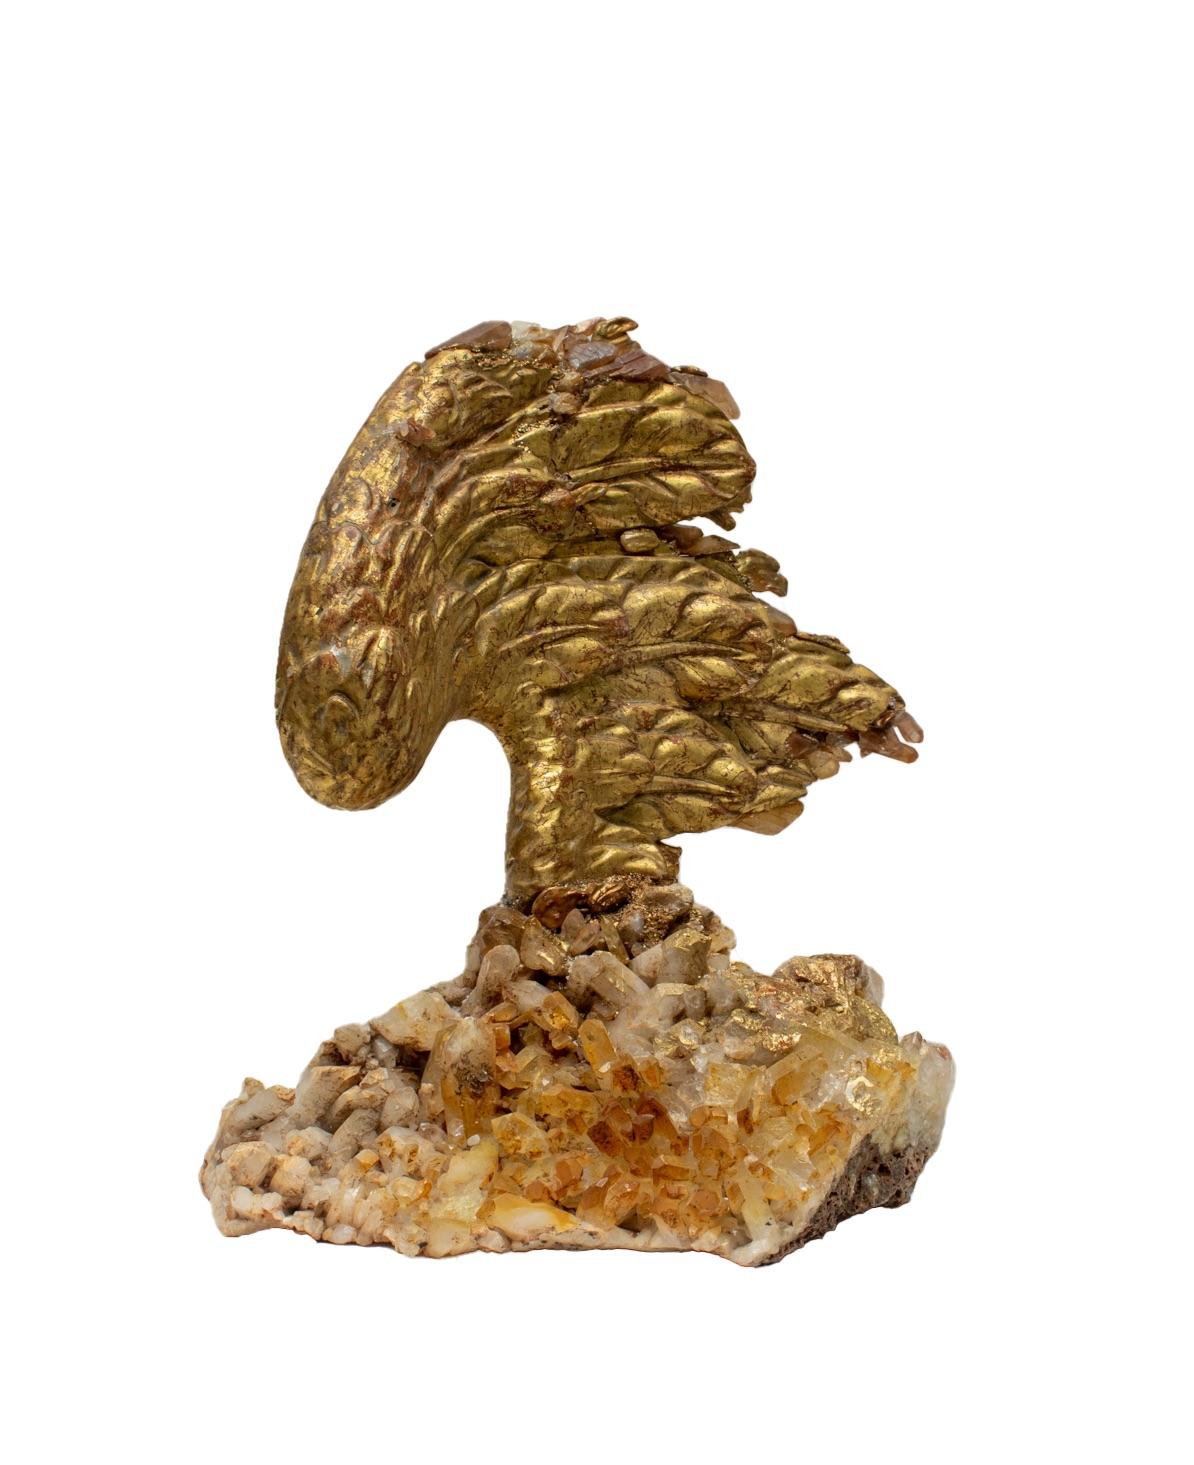 18th century Italian hand-carved gold leaf angel wing on a crystal quartz cluster with Baroque pearls.

The hand-carved gold leaf angel wing is originally from a historic church in Liguria. This piece is particularly rare and exquisite due to its